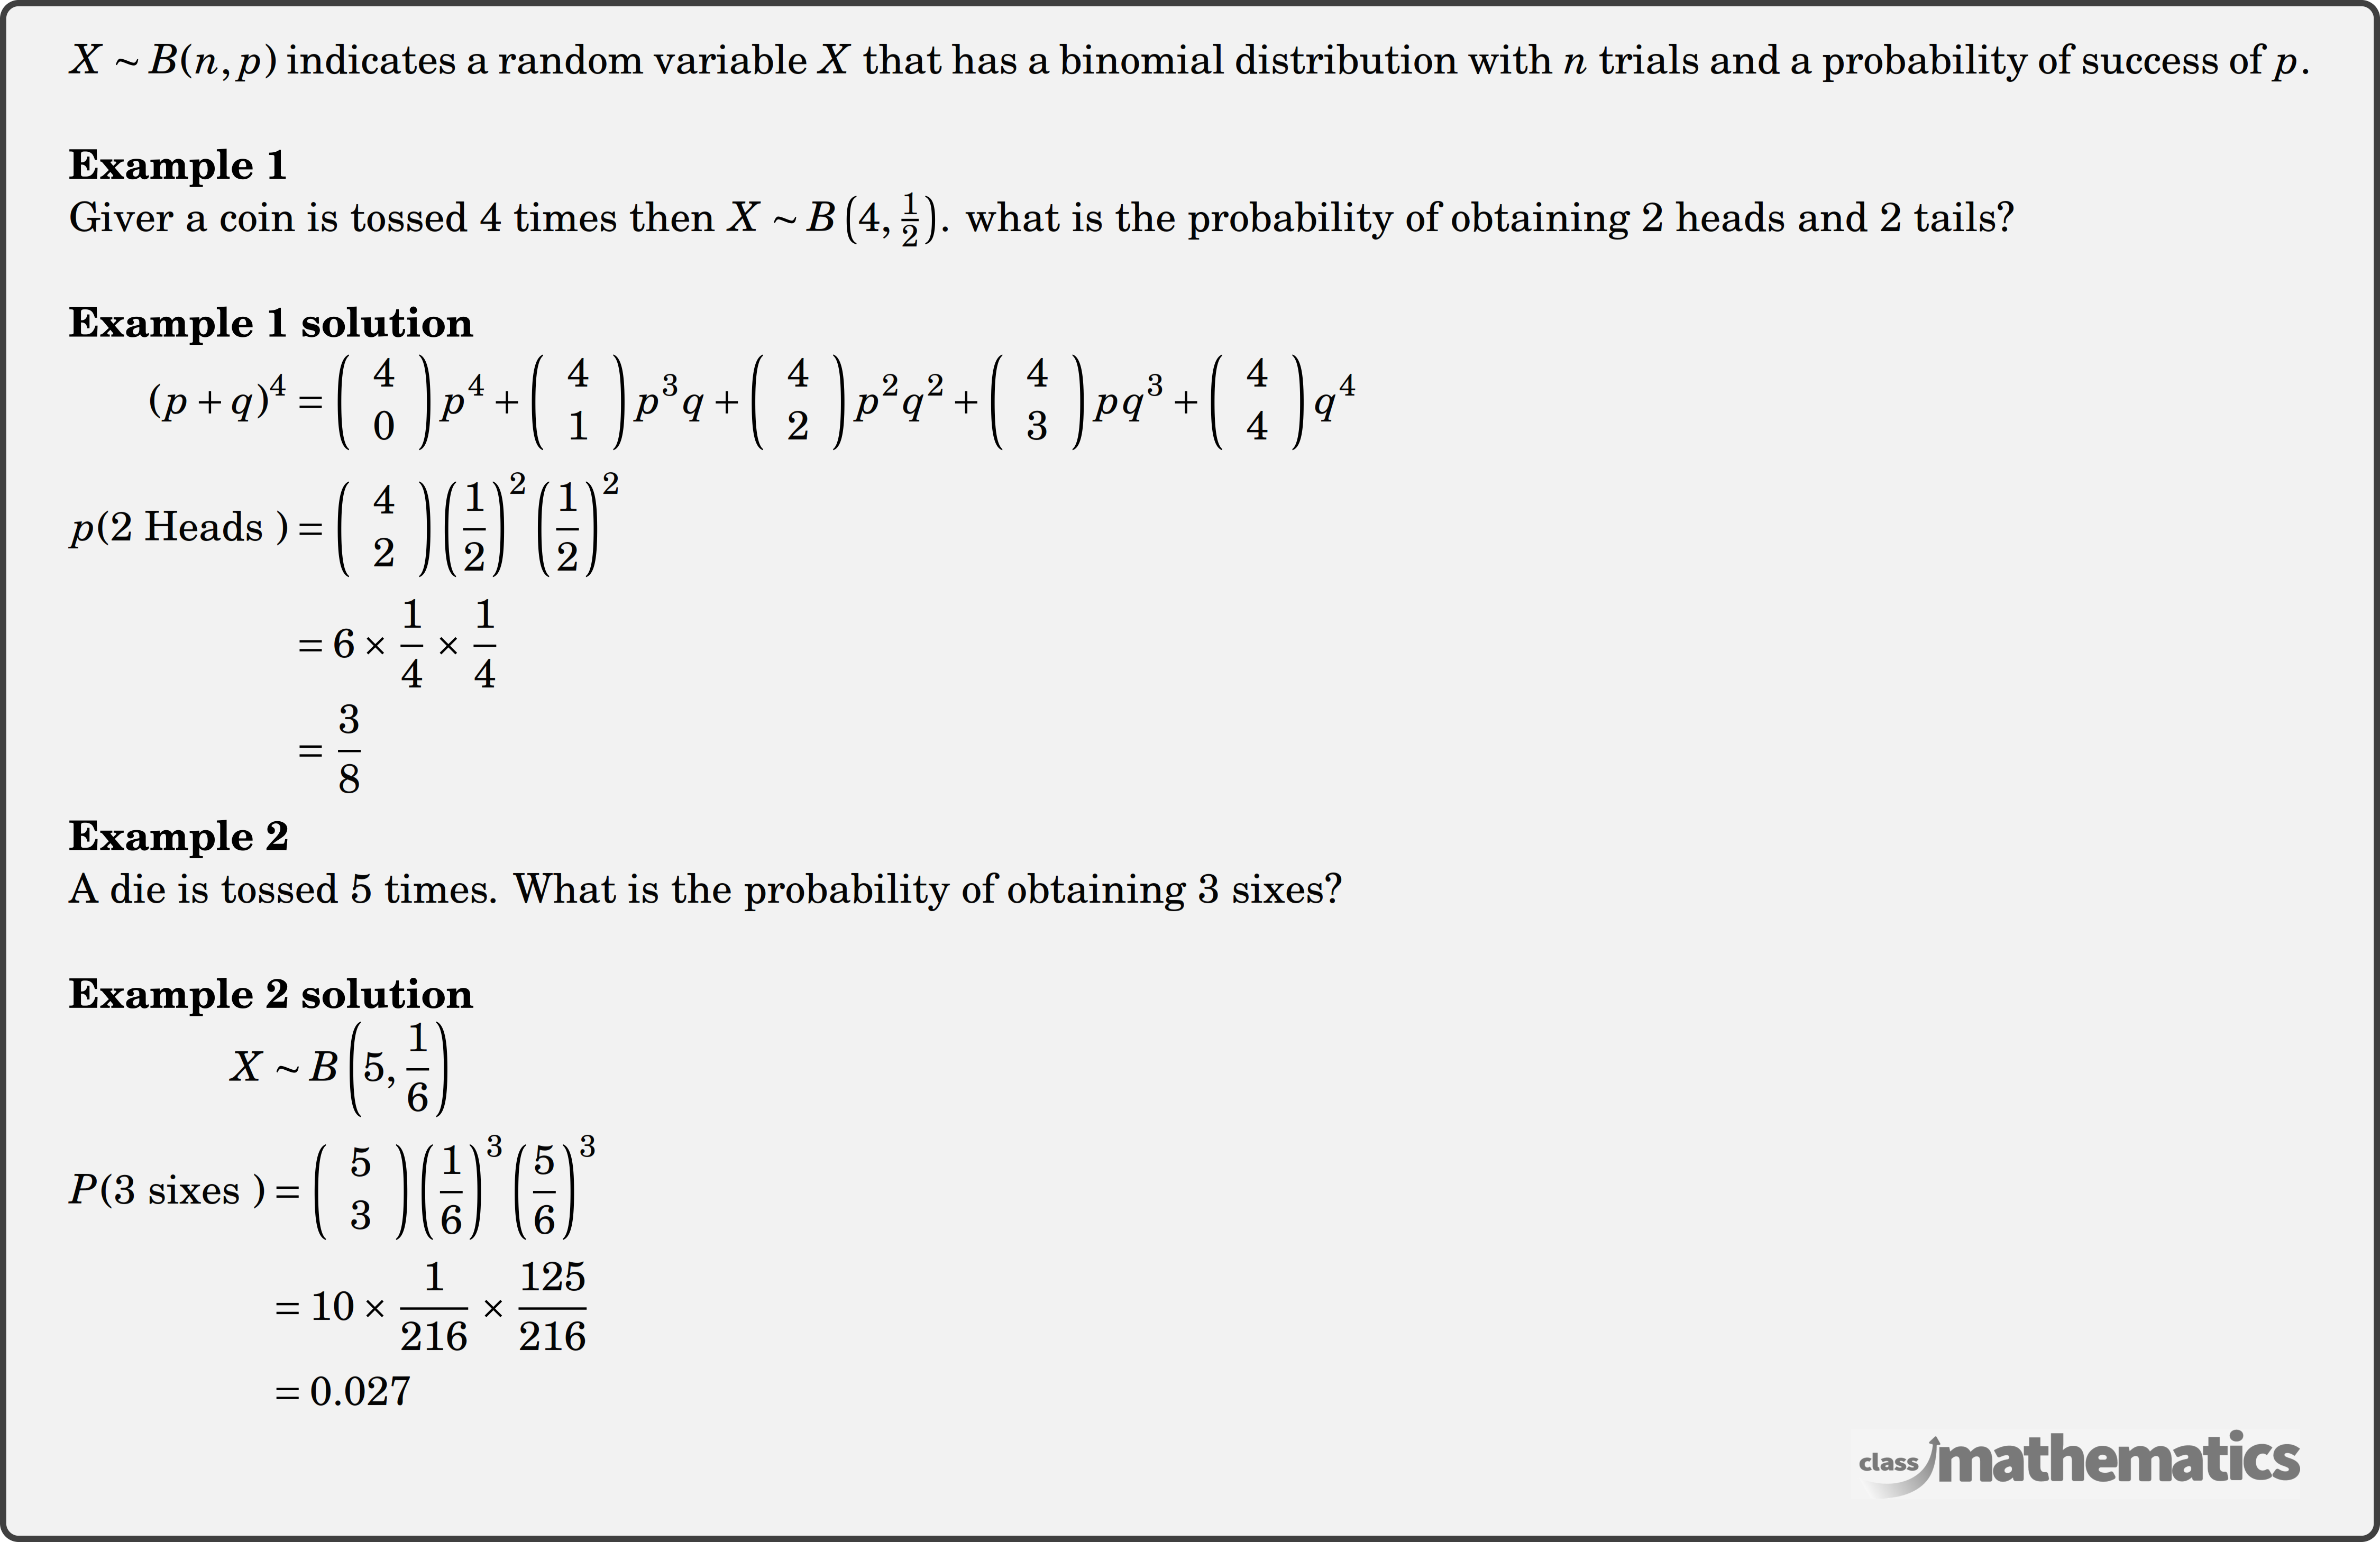 \(X \sim B(n, p)\) indicates a random variable \(X\) that has a binomial distribution with \(n\) trials and a probability of success of \(p\).\\  \textbf{Example 1}\\ Giver a coin is tossed 4 times then \(X \sim B\left(4, \frac{1}{2}\right)\). what is the probability of obtaining 2 heads and 2 tails?\\  \textbf{Example 1 solution}\\ $\begin{aligned} (p+q)^4&=\left(\begin{array}{l} 4 \\ 0 \end{array}\right) p^4+\left(\begin{array}{l} 4 \\ 1 \end{array}\right) p^3 q+\left(\begin{array}{l} 4 \\ 2 \end{array}\right) p^2 q^2+\left(\begin{array}{l} 4 \\ 3 \end{array}\right) pq^3+\left(\begin{array}{l} 4 \\ 4 \end{array}\right) q^4 \\  p(2 \text { Heads })&=\left(\begin{array}{l} 4 \\ 2 \end{array}\right)\left(\frac{1}{2}\right)^2\left(\frac{1}{2}\right)^2 \\ &=6 \times \frac{1}{4} \times \frac{1}{4} \\ &=\frac{3}{8} \end{aligned}$\\  \textbf{Example 2}\\ A die is tossed 5 times. What is the probability of obtaining 3 sixes? \\  \textbf{Example 2 solution}\\ $\begin{aligned}  X &\sim B\left(5, \frac{1}{6}\right) \\  P(3 \text { sixes })&=\left(\begin{array}{l} 5 \\ 3 \end{array}\right)\left(\frac{1}{6}\right)^3\left(\frac{5}{6}\right)^3 \\ &=10 \times \frac{1}{216} \times \frac{125}{216} \\ &=0.027 \end{aligned}$\\